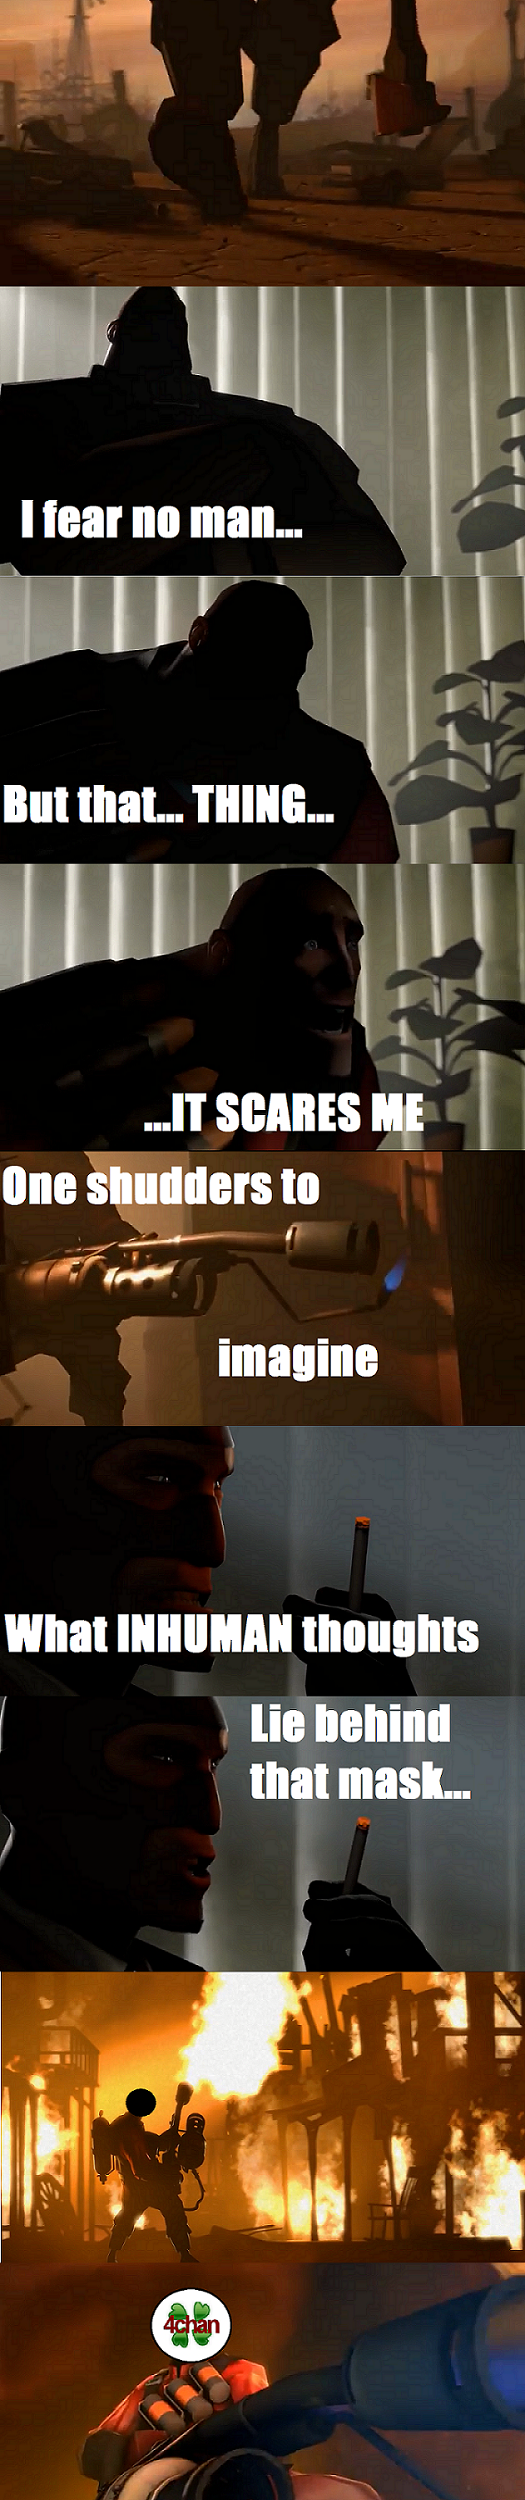 ...It scares me too...